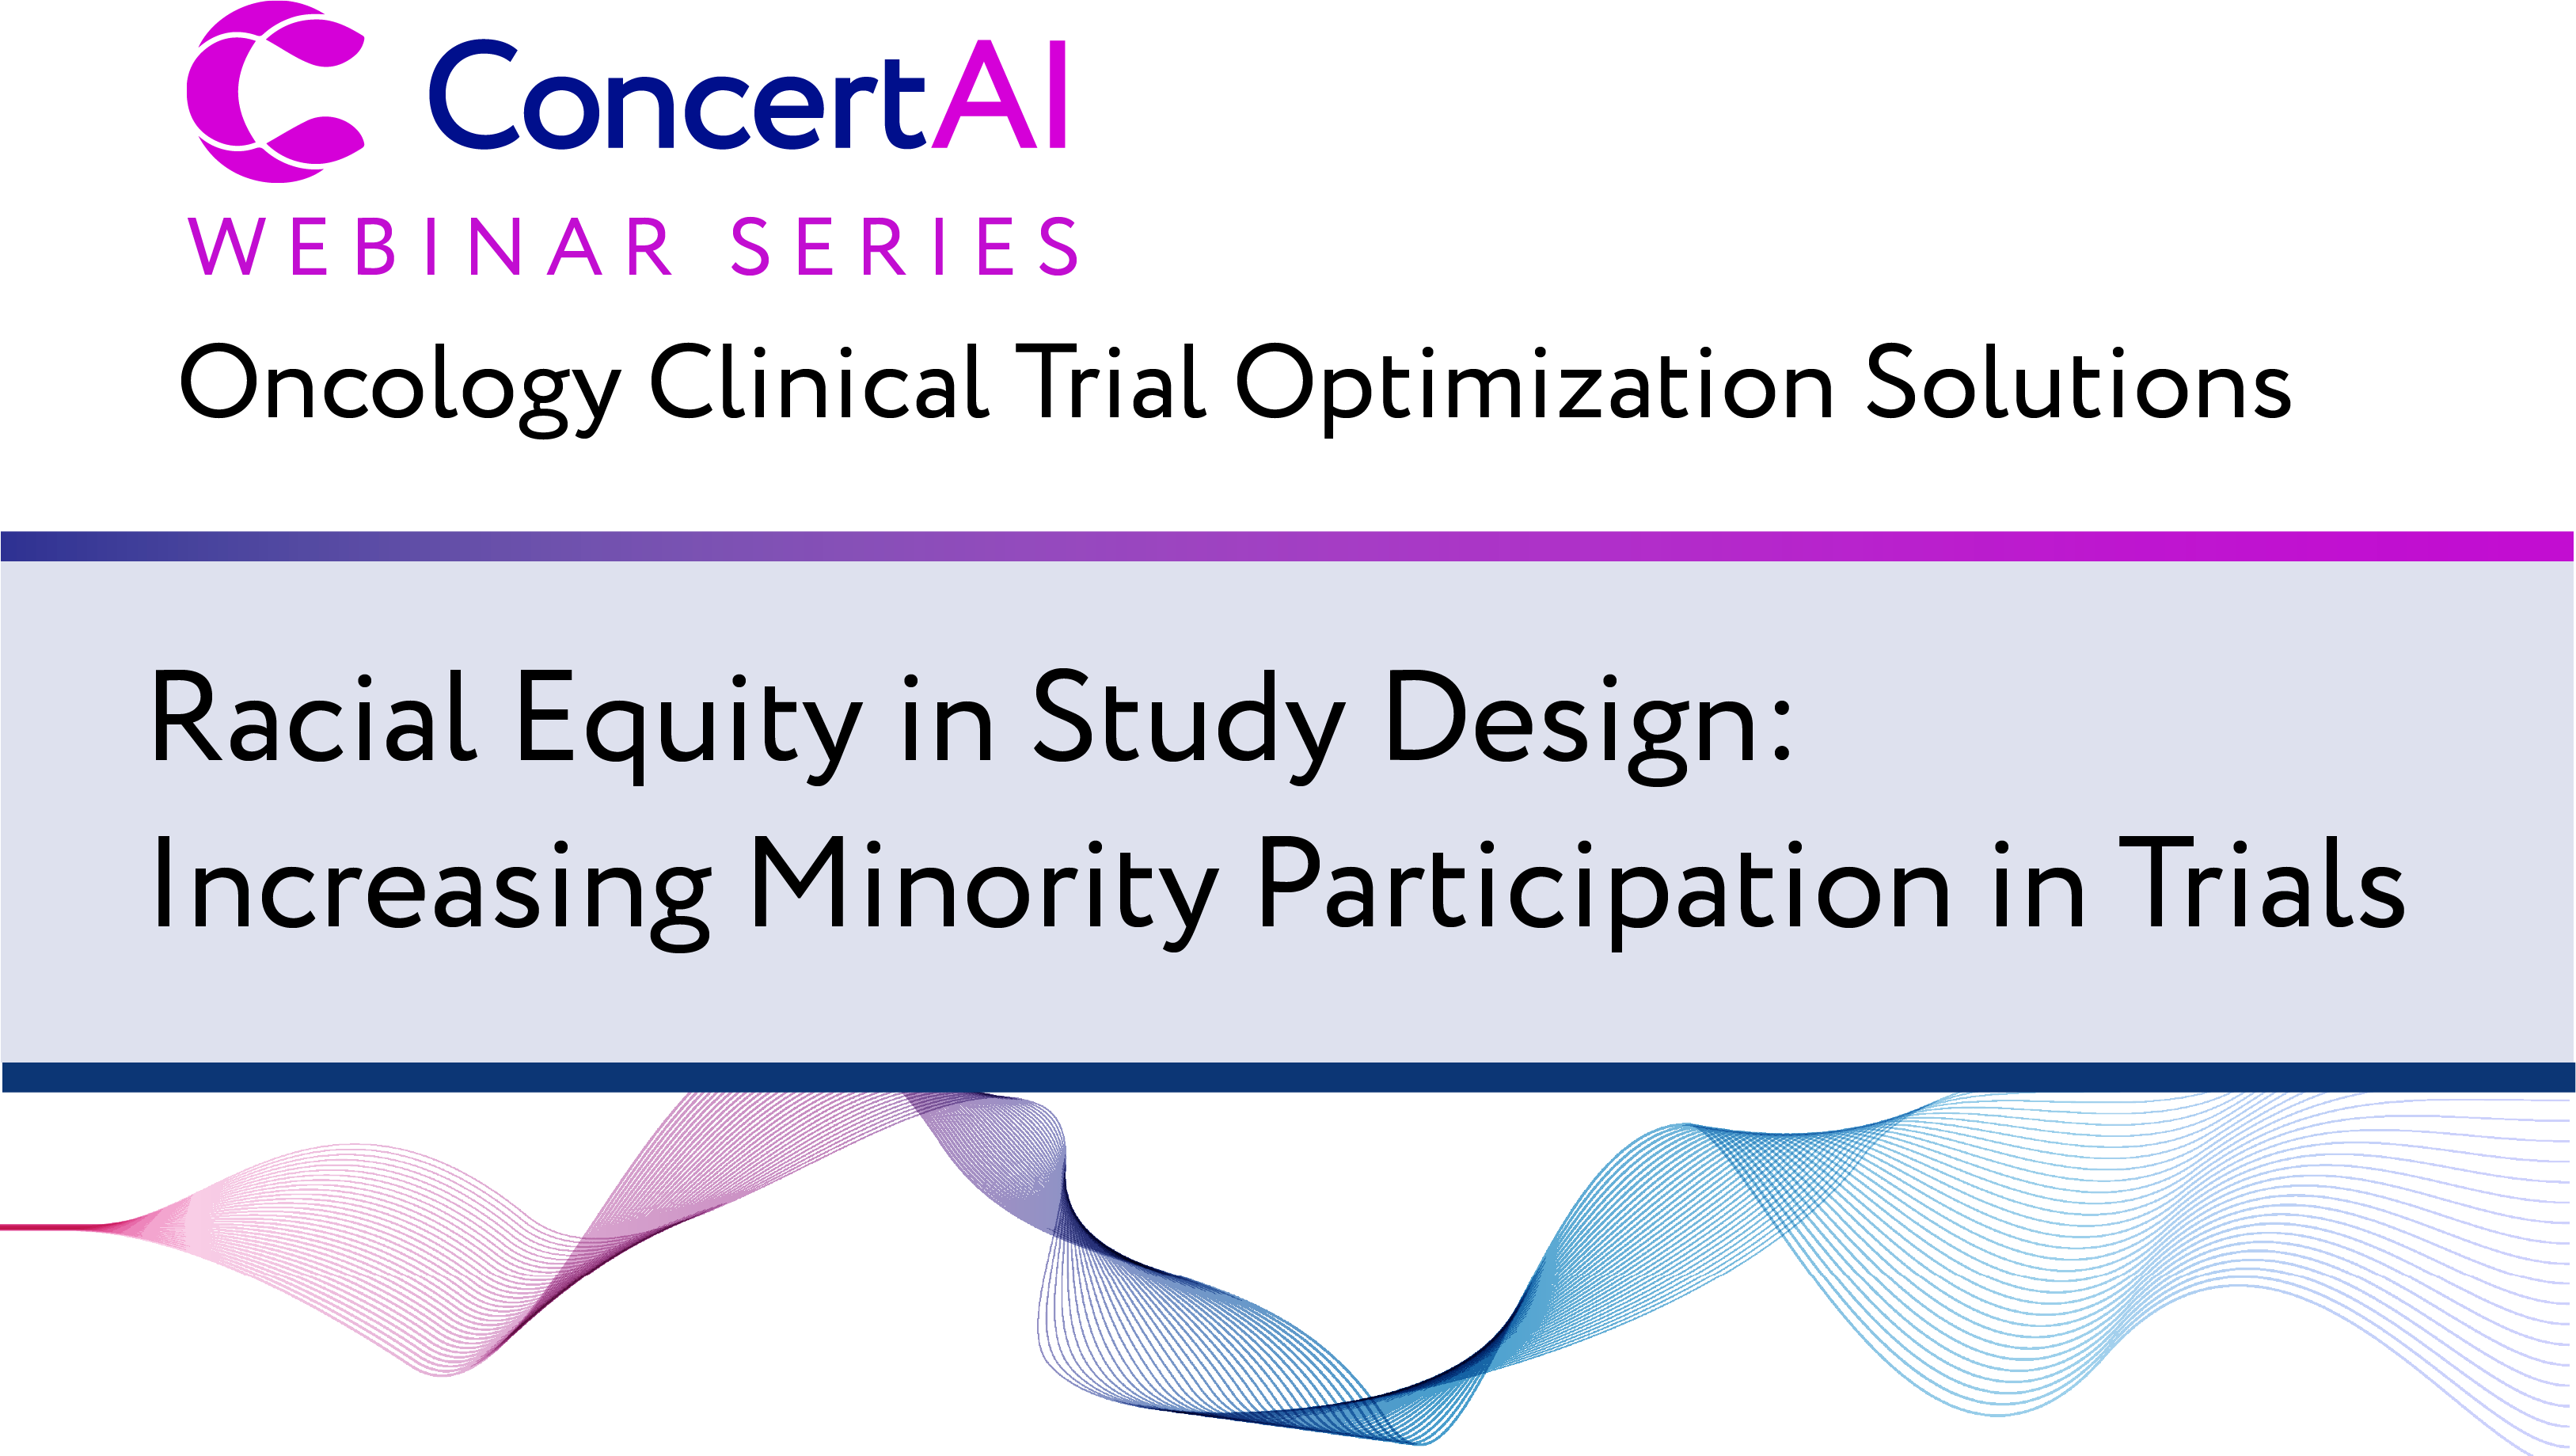 Racial Equity in Study Design: Increasing Minority Participation in Trials